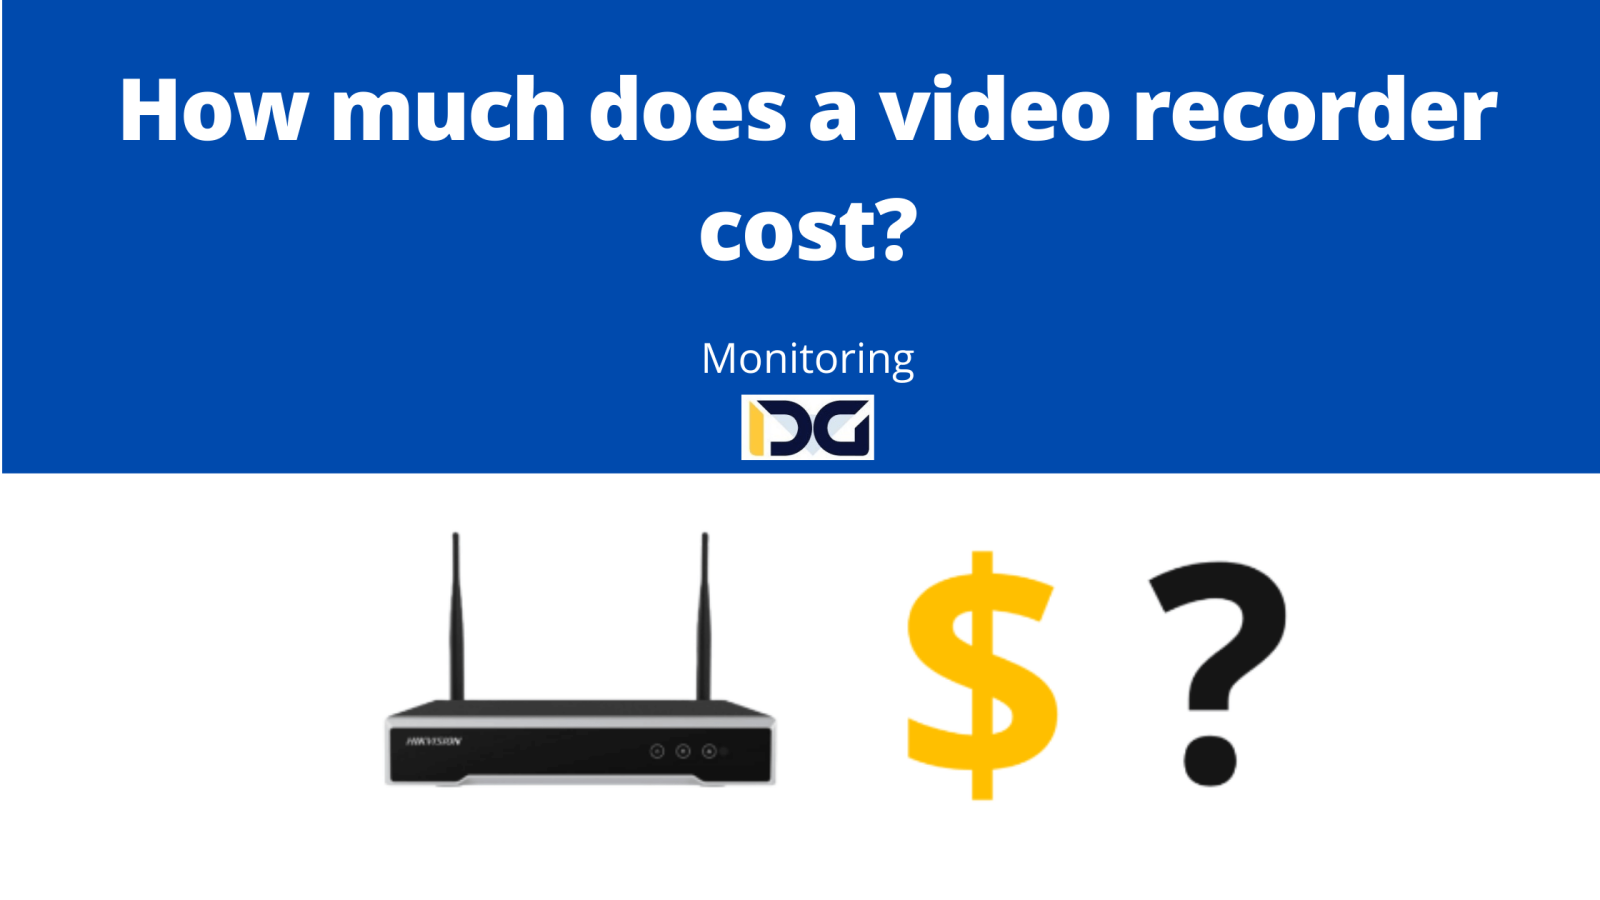 How much does a video recorder cost?